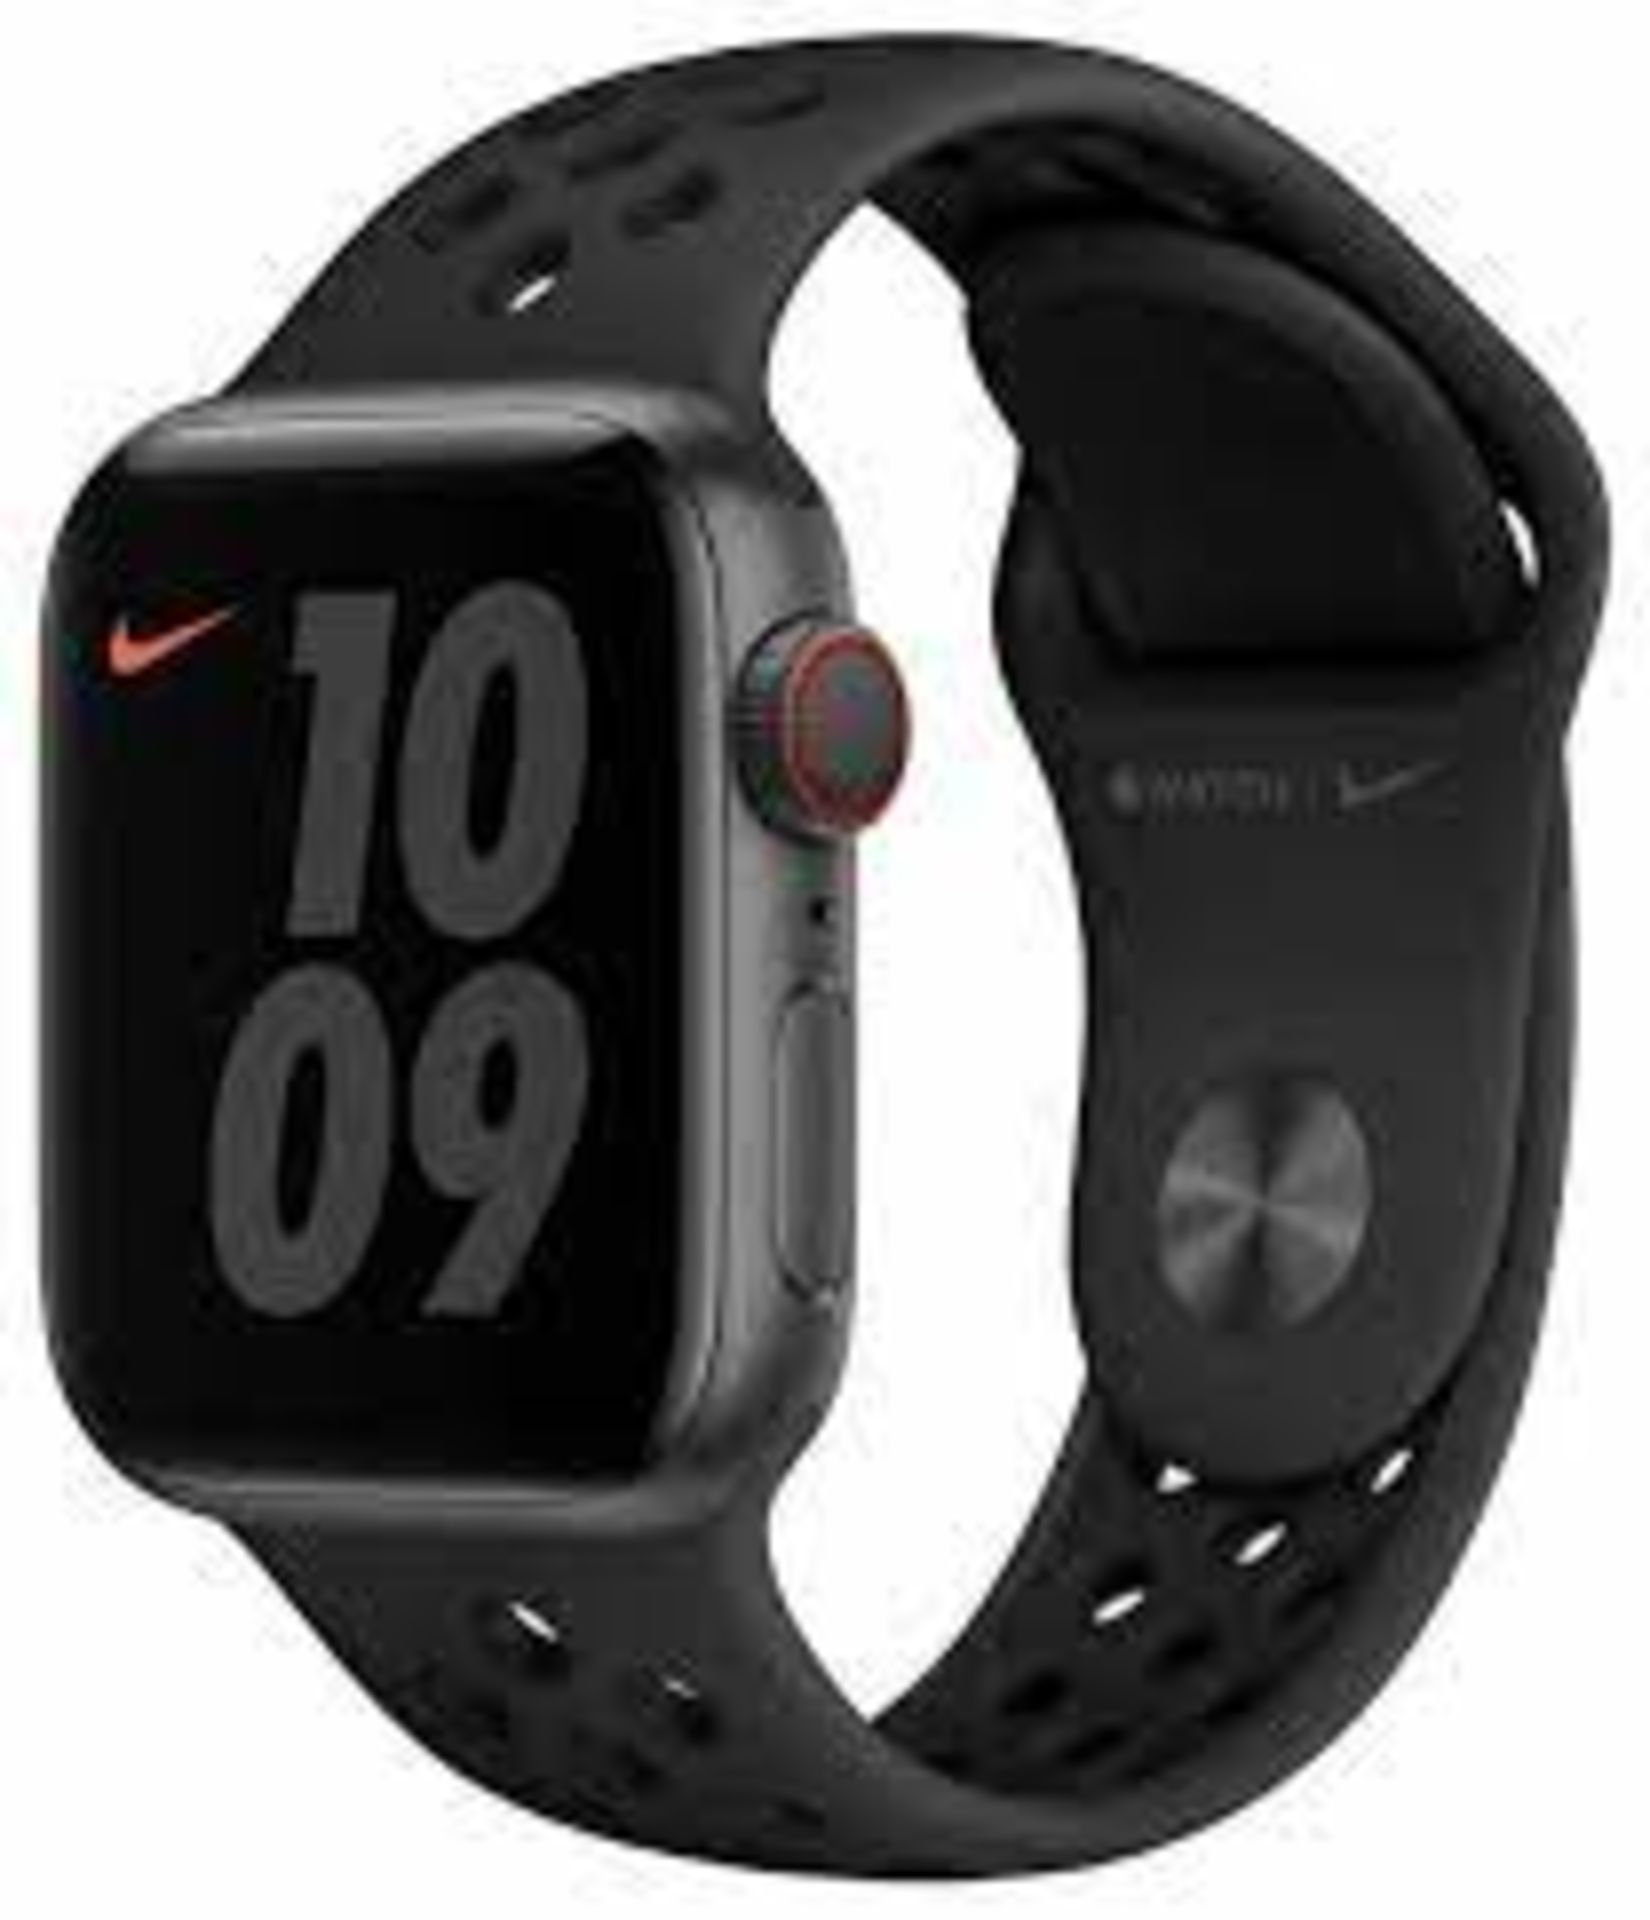 BRAND NEW APPLE WATCH SE, SPACE GREY, ALUMINIUM WITH ANTHROCITE AND BLACK NIKE SPORTS BAND 40MM